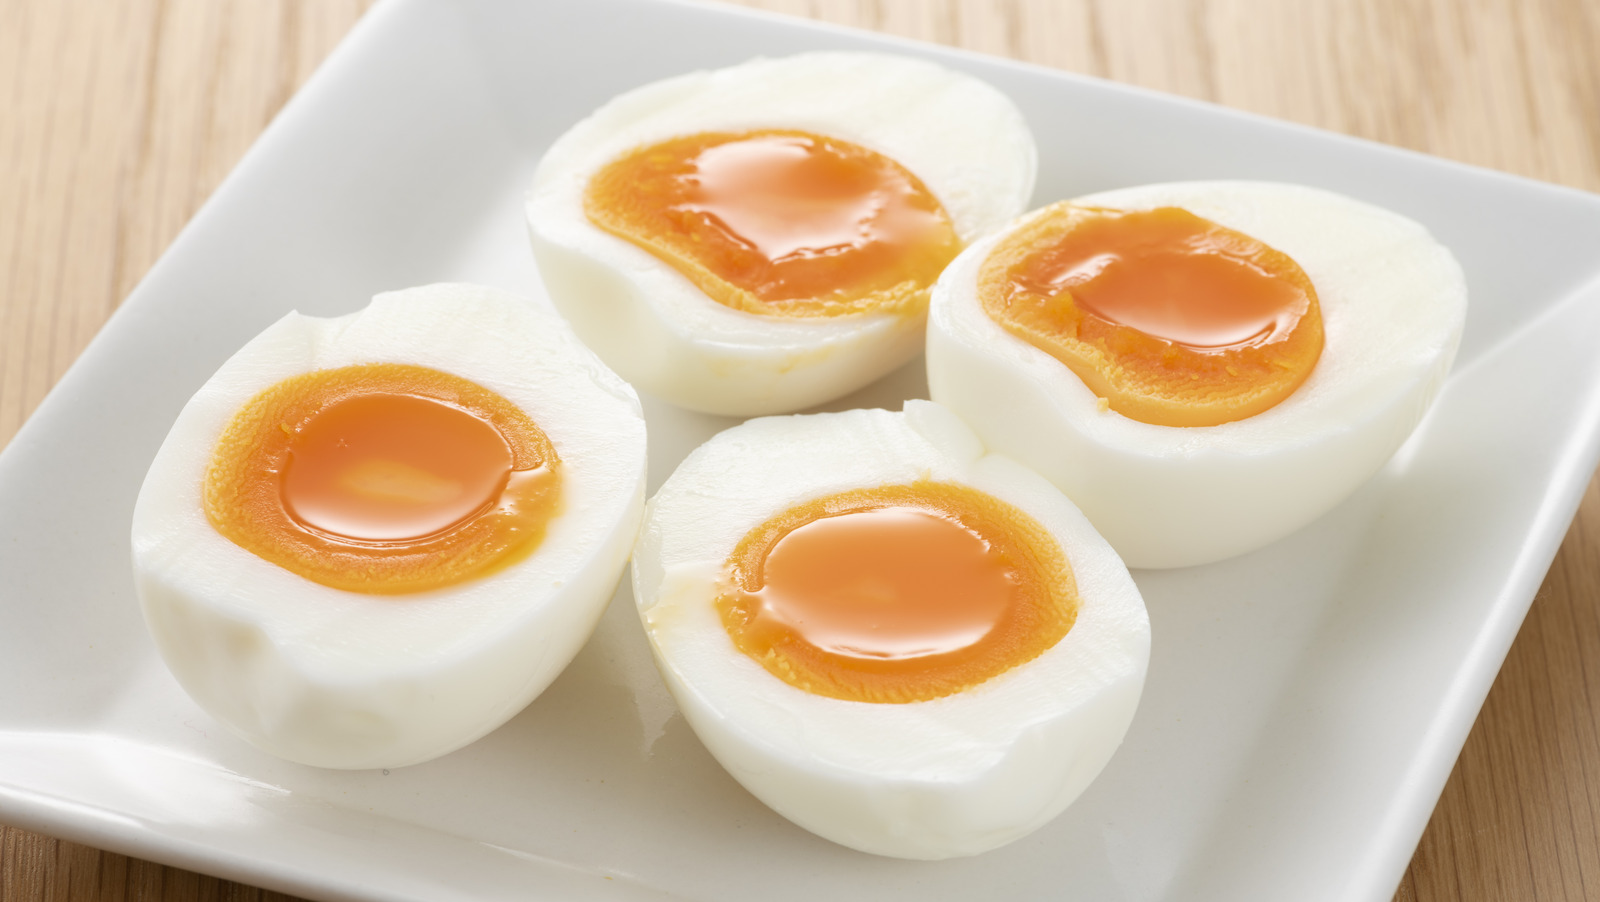 Soft Boiled Egg in Microwave - How to Microwave Soft Boiled Eggs